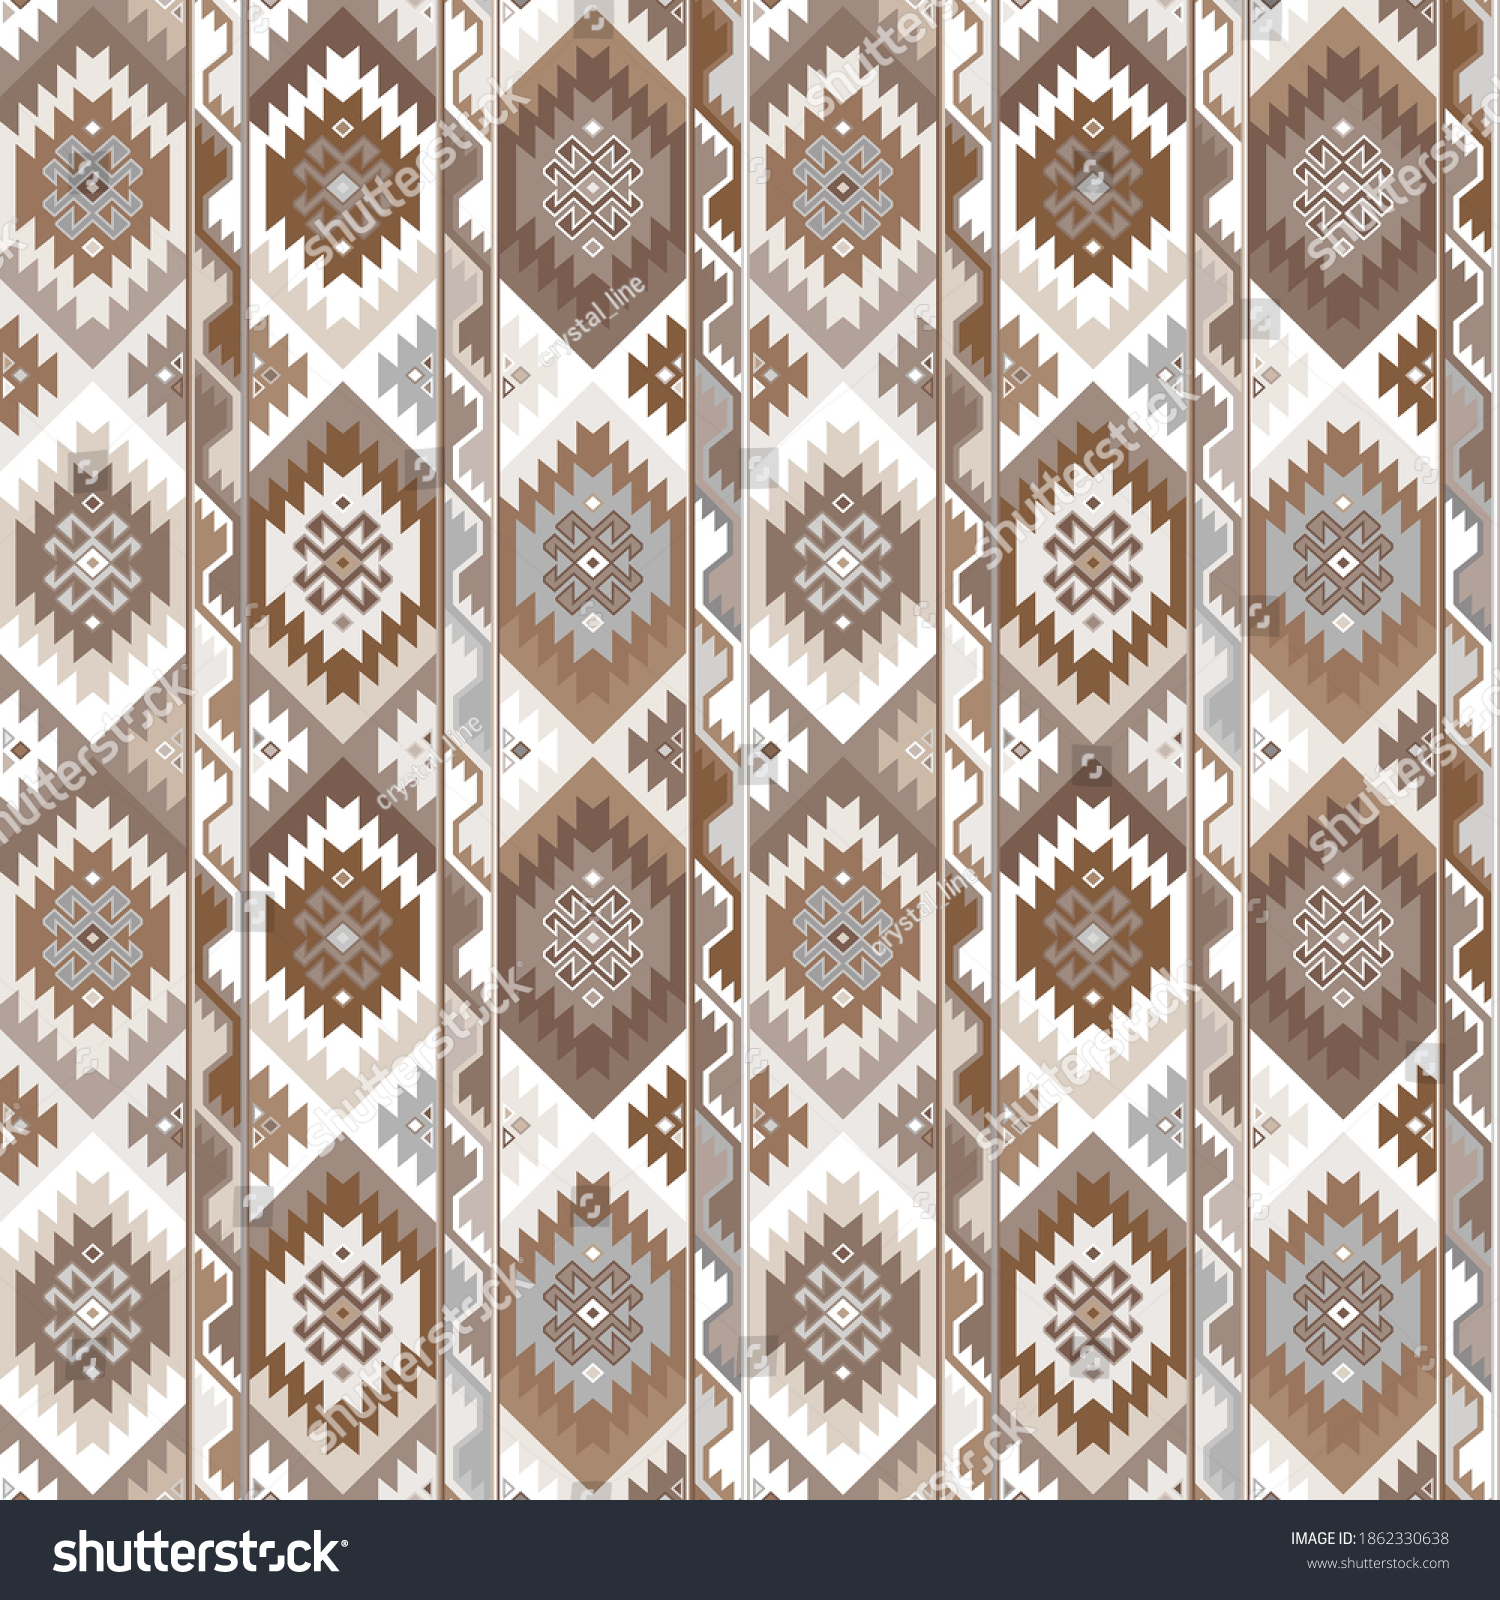 Kilim bohemian seamless pattern in vector format for printed fabrics or any other purposes. The pattern is tileable and easy to use. #1862330638